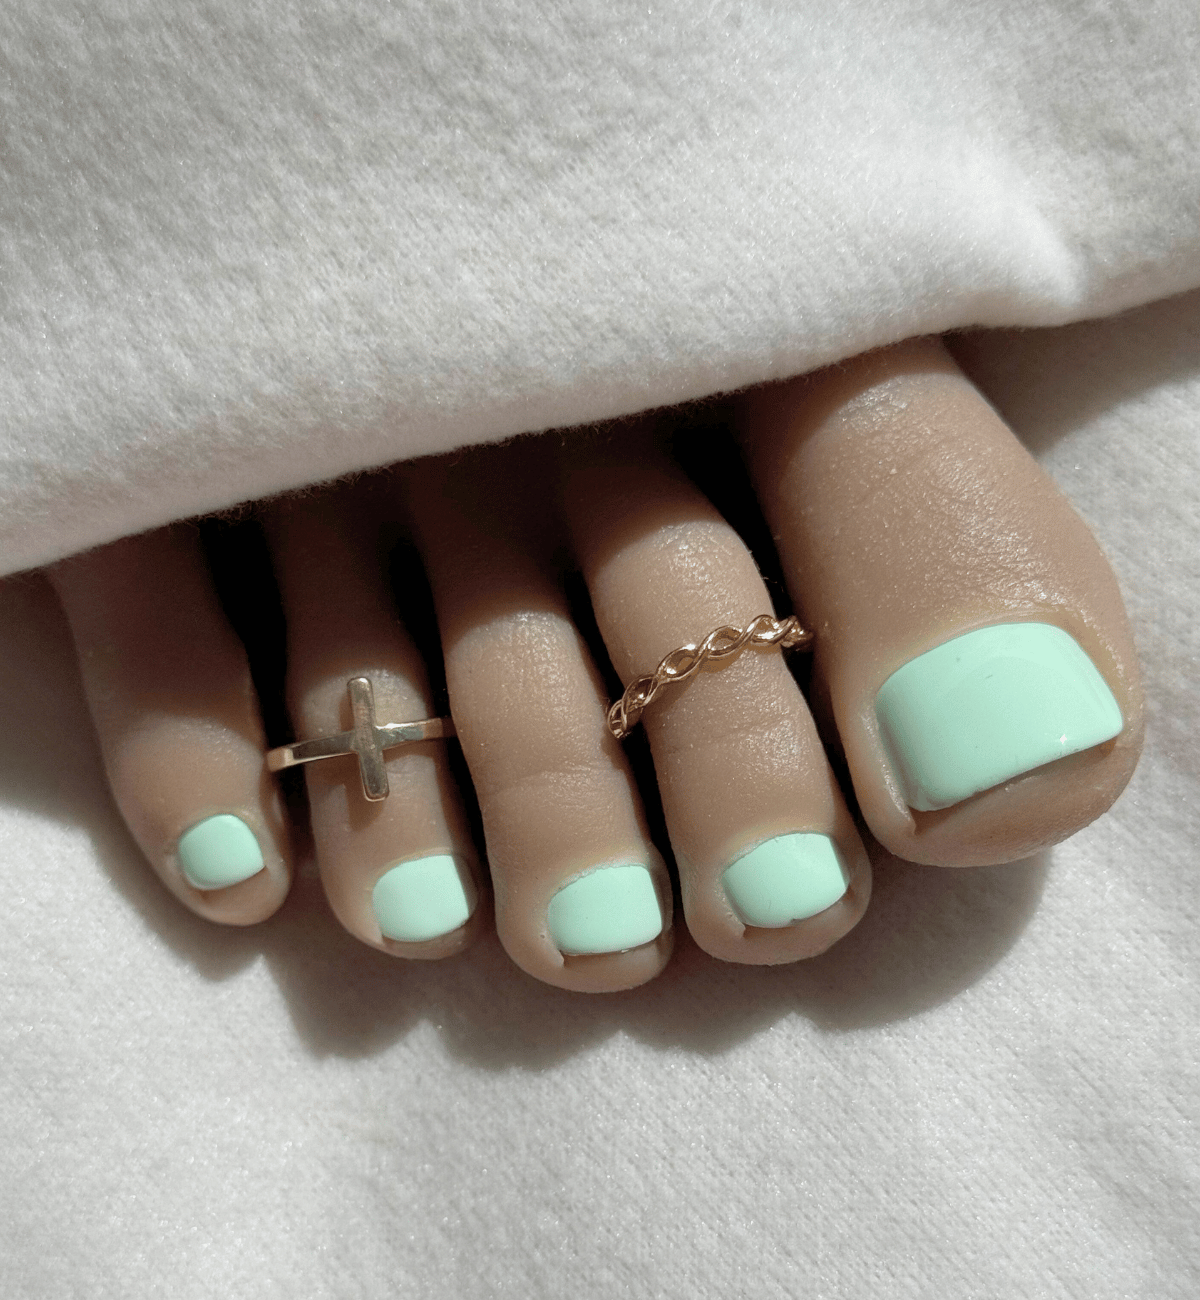 FAUX ONGLES PIEDS VERT MENTHE